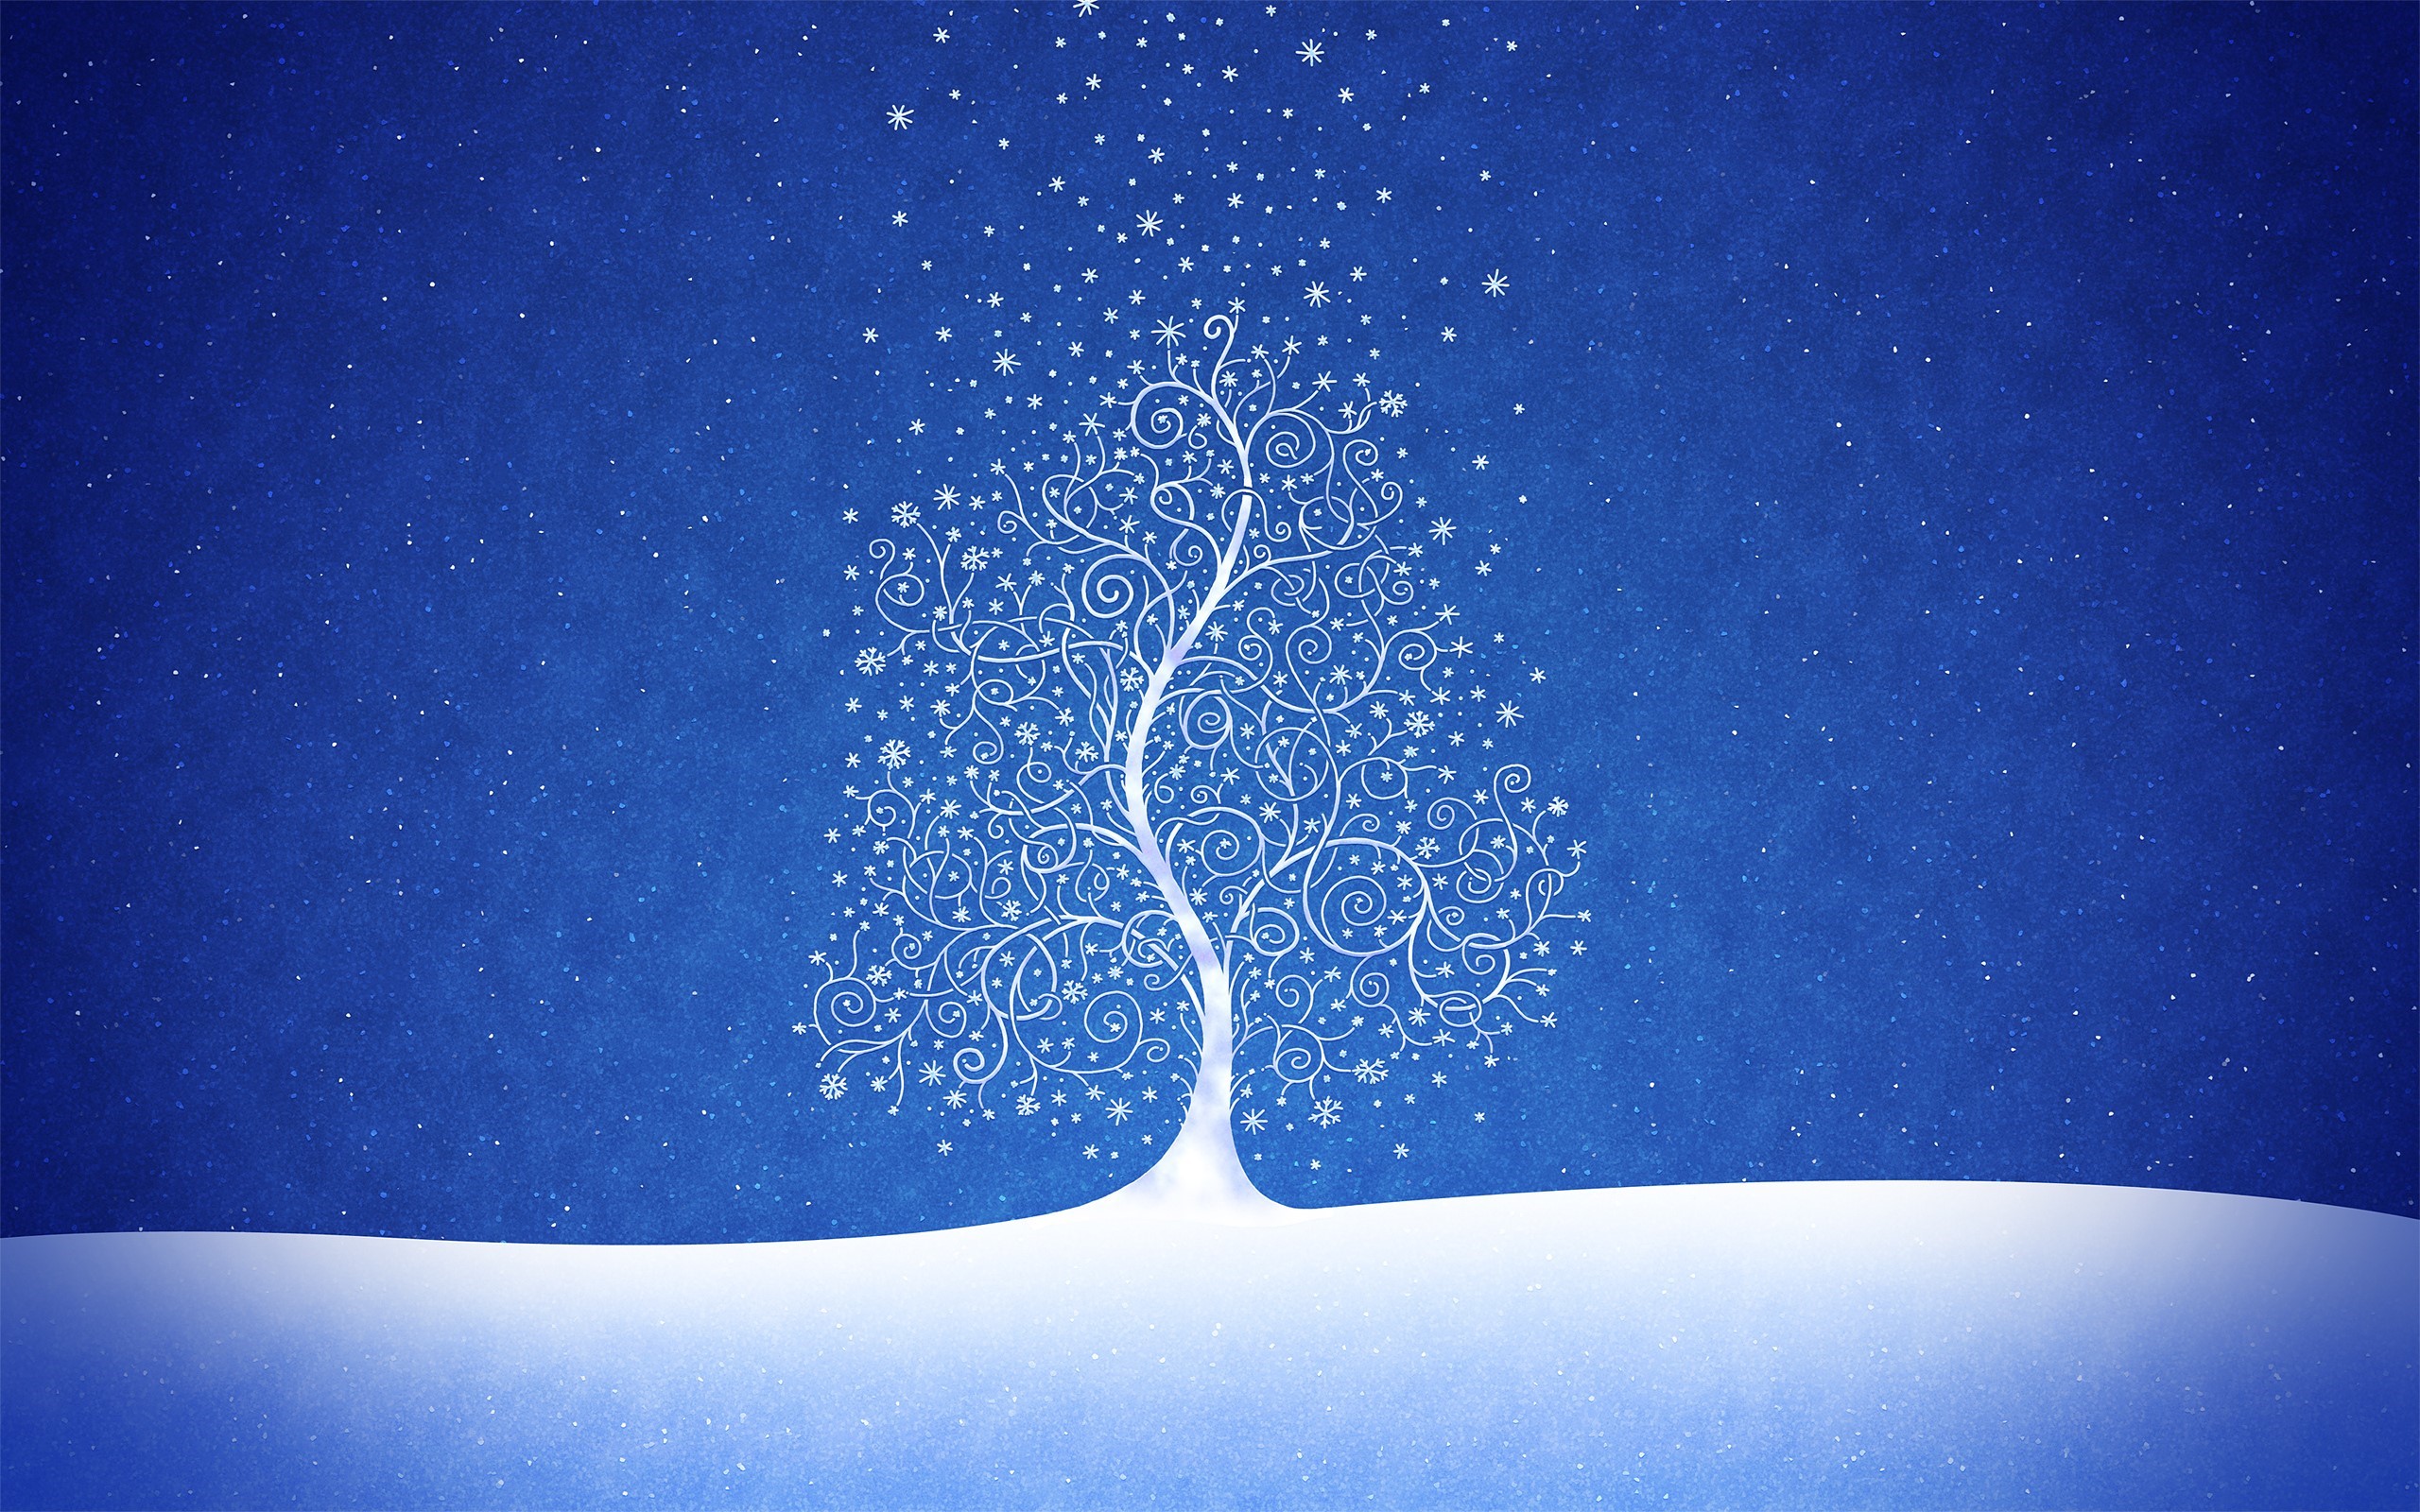 Snowy Type Tree Design Image HD Wallpapers